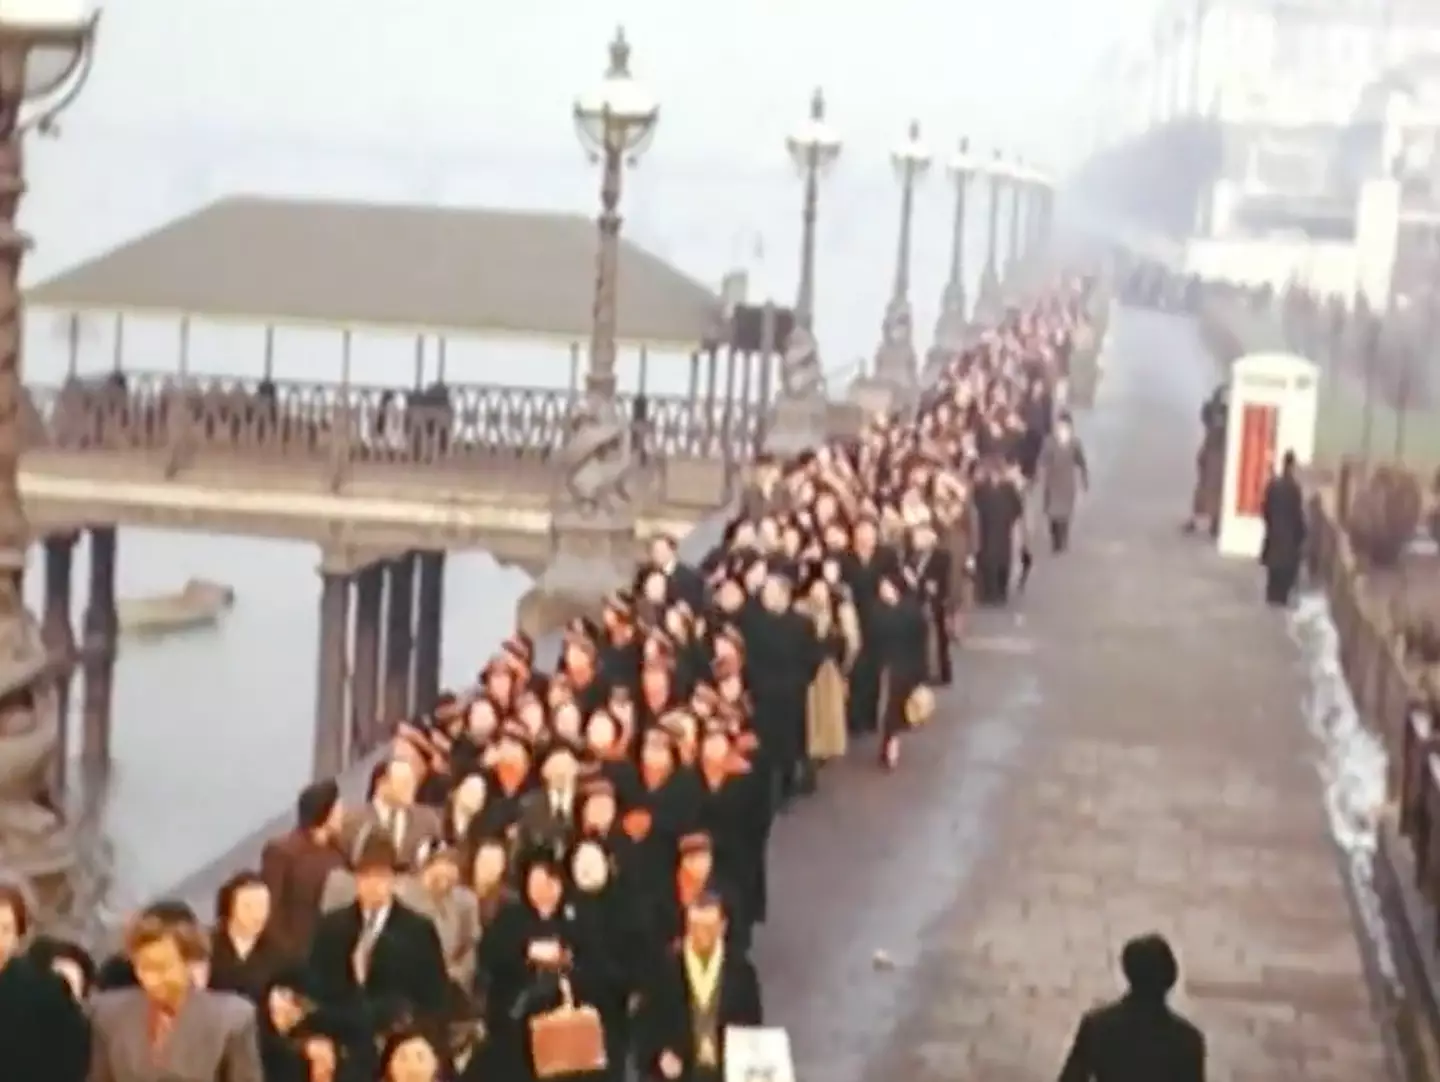 The footage was from King George VI's funeral procession in 1952.